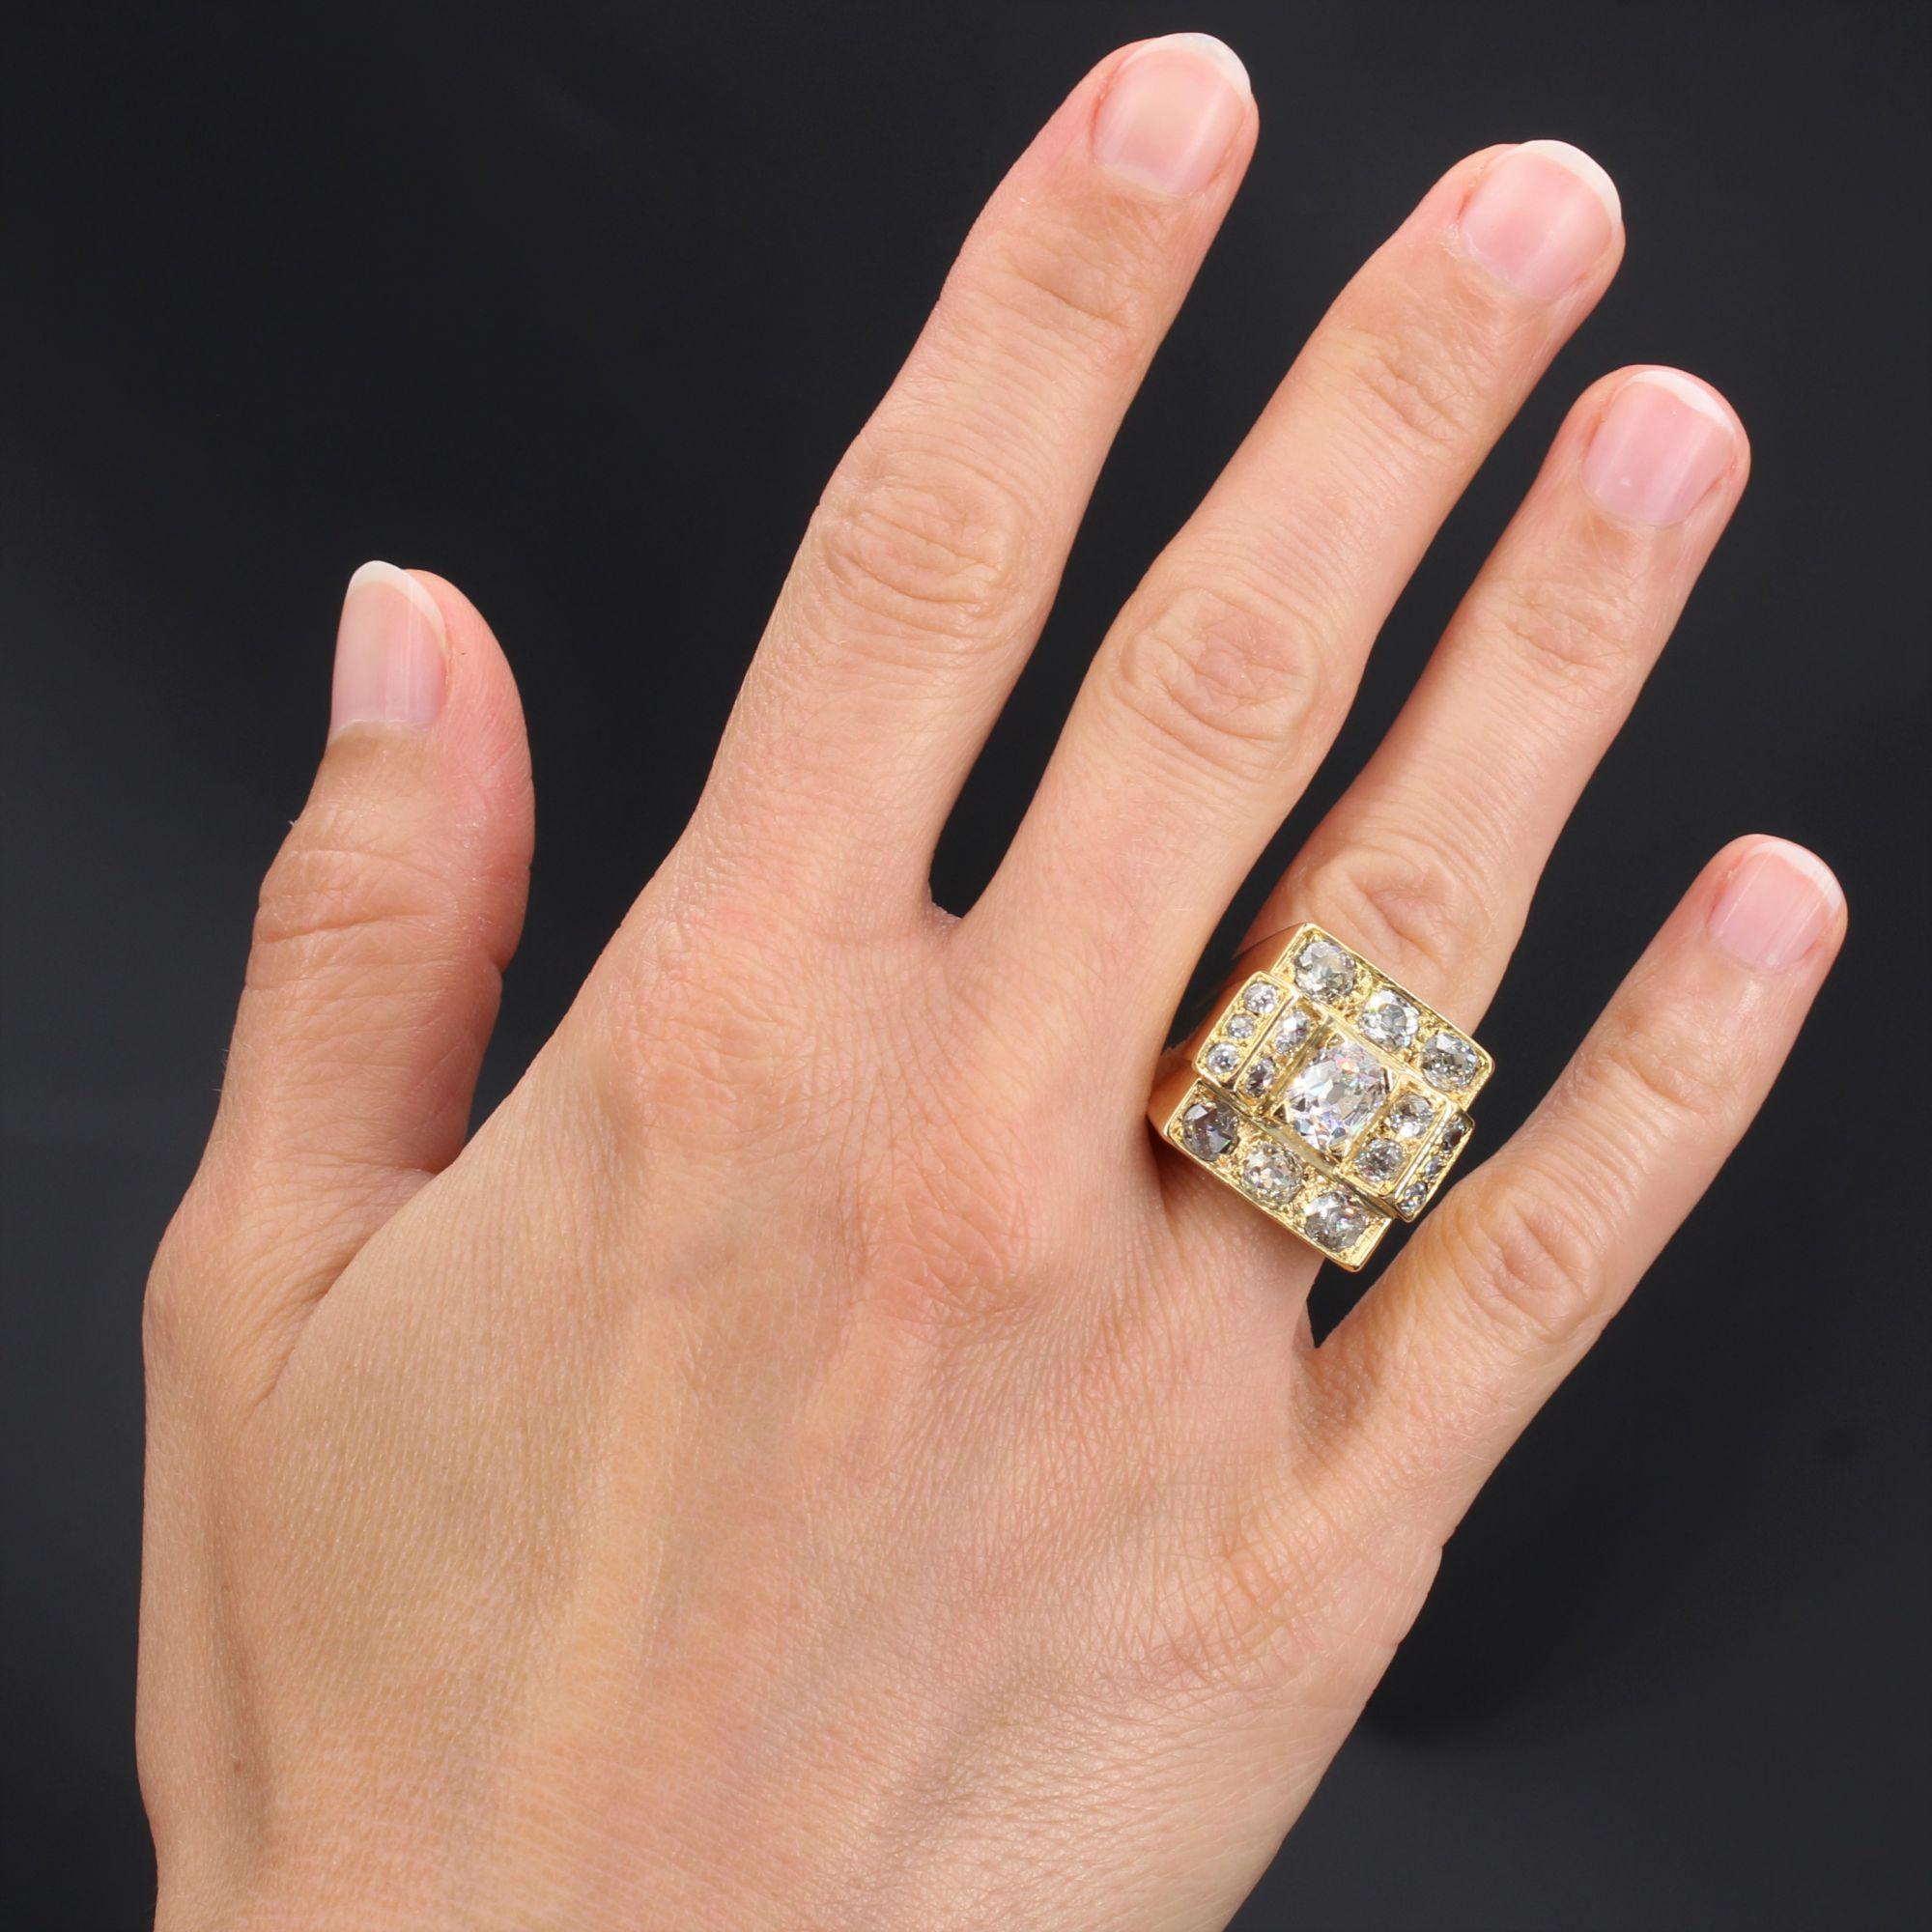 Ring in 18 karat yellow gold, eagle head hallmark.
Geometrically shaped, this imposing tank ring is set with an antique step-cut diamond, supported by two triangle-shaped motifs set with antique brilliant-cut diamonds. On both sides, the edges are